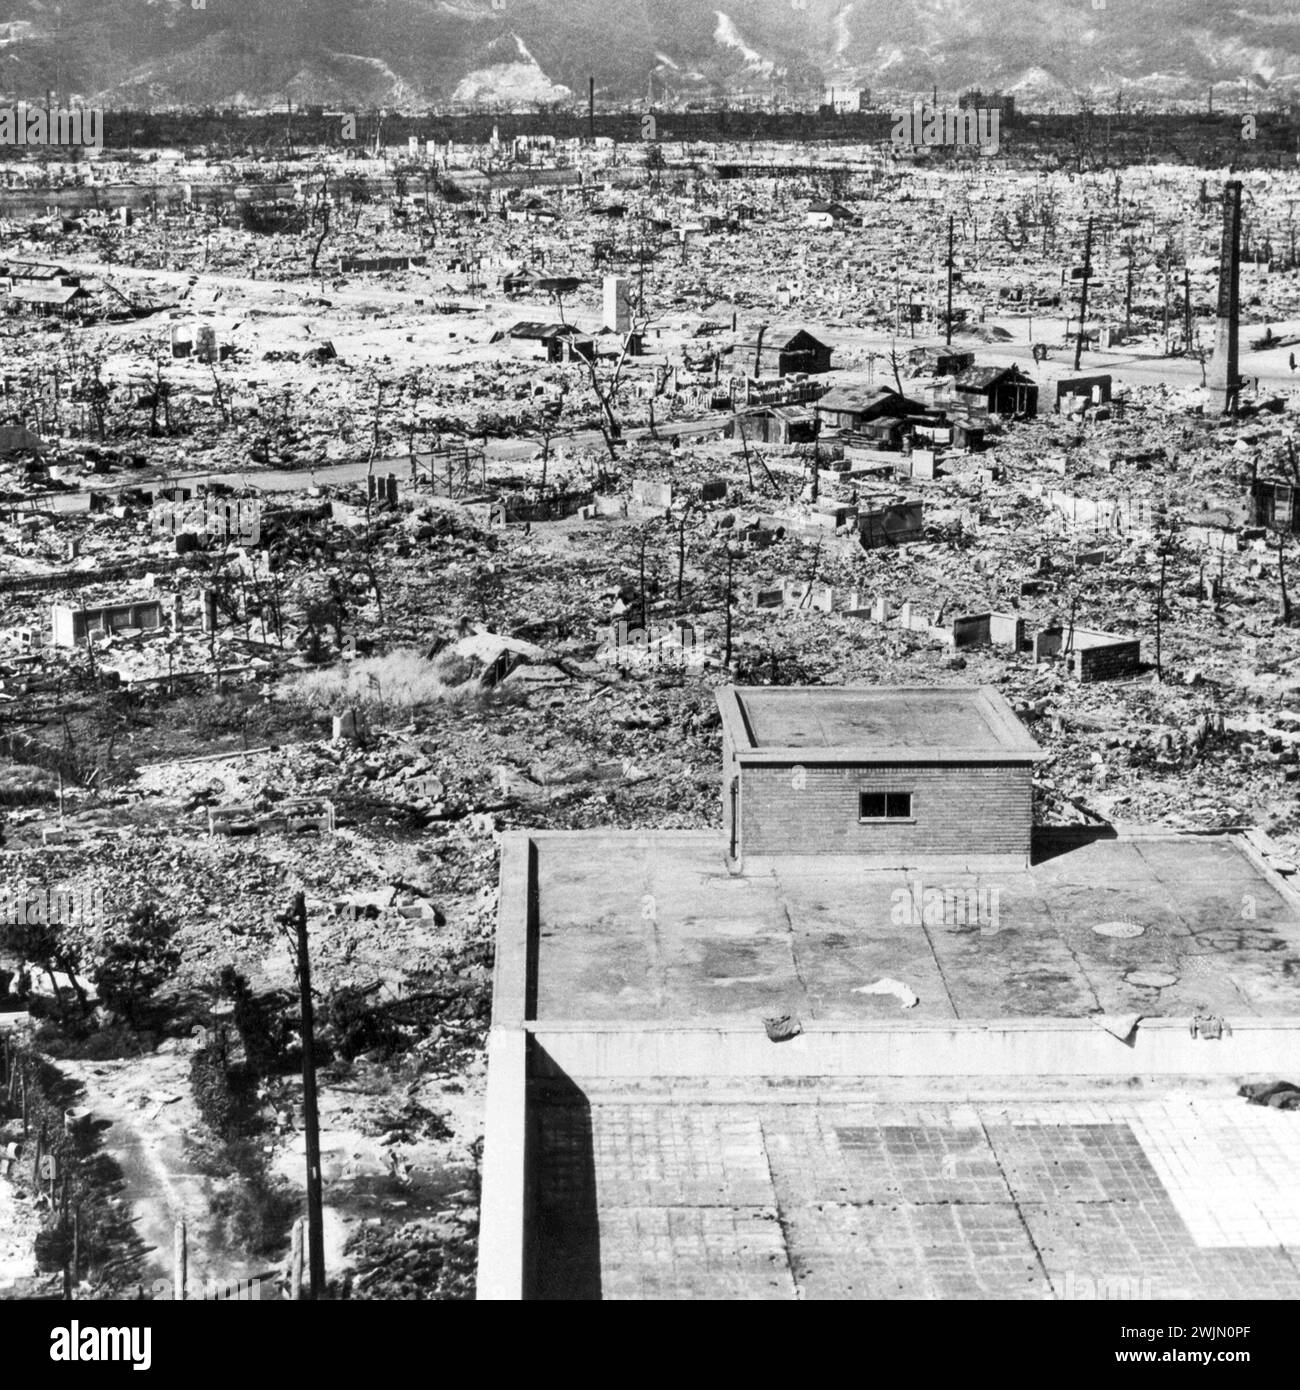 Atomic Effects - Hiroshima, Japan – after the bomb, 1940s Stock Photo